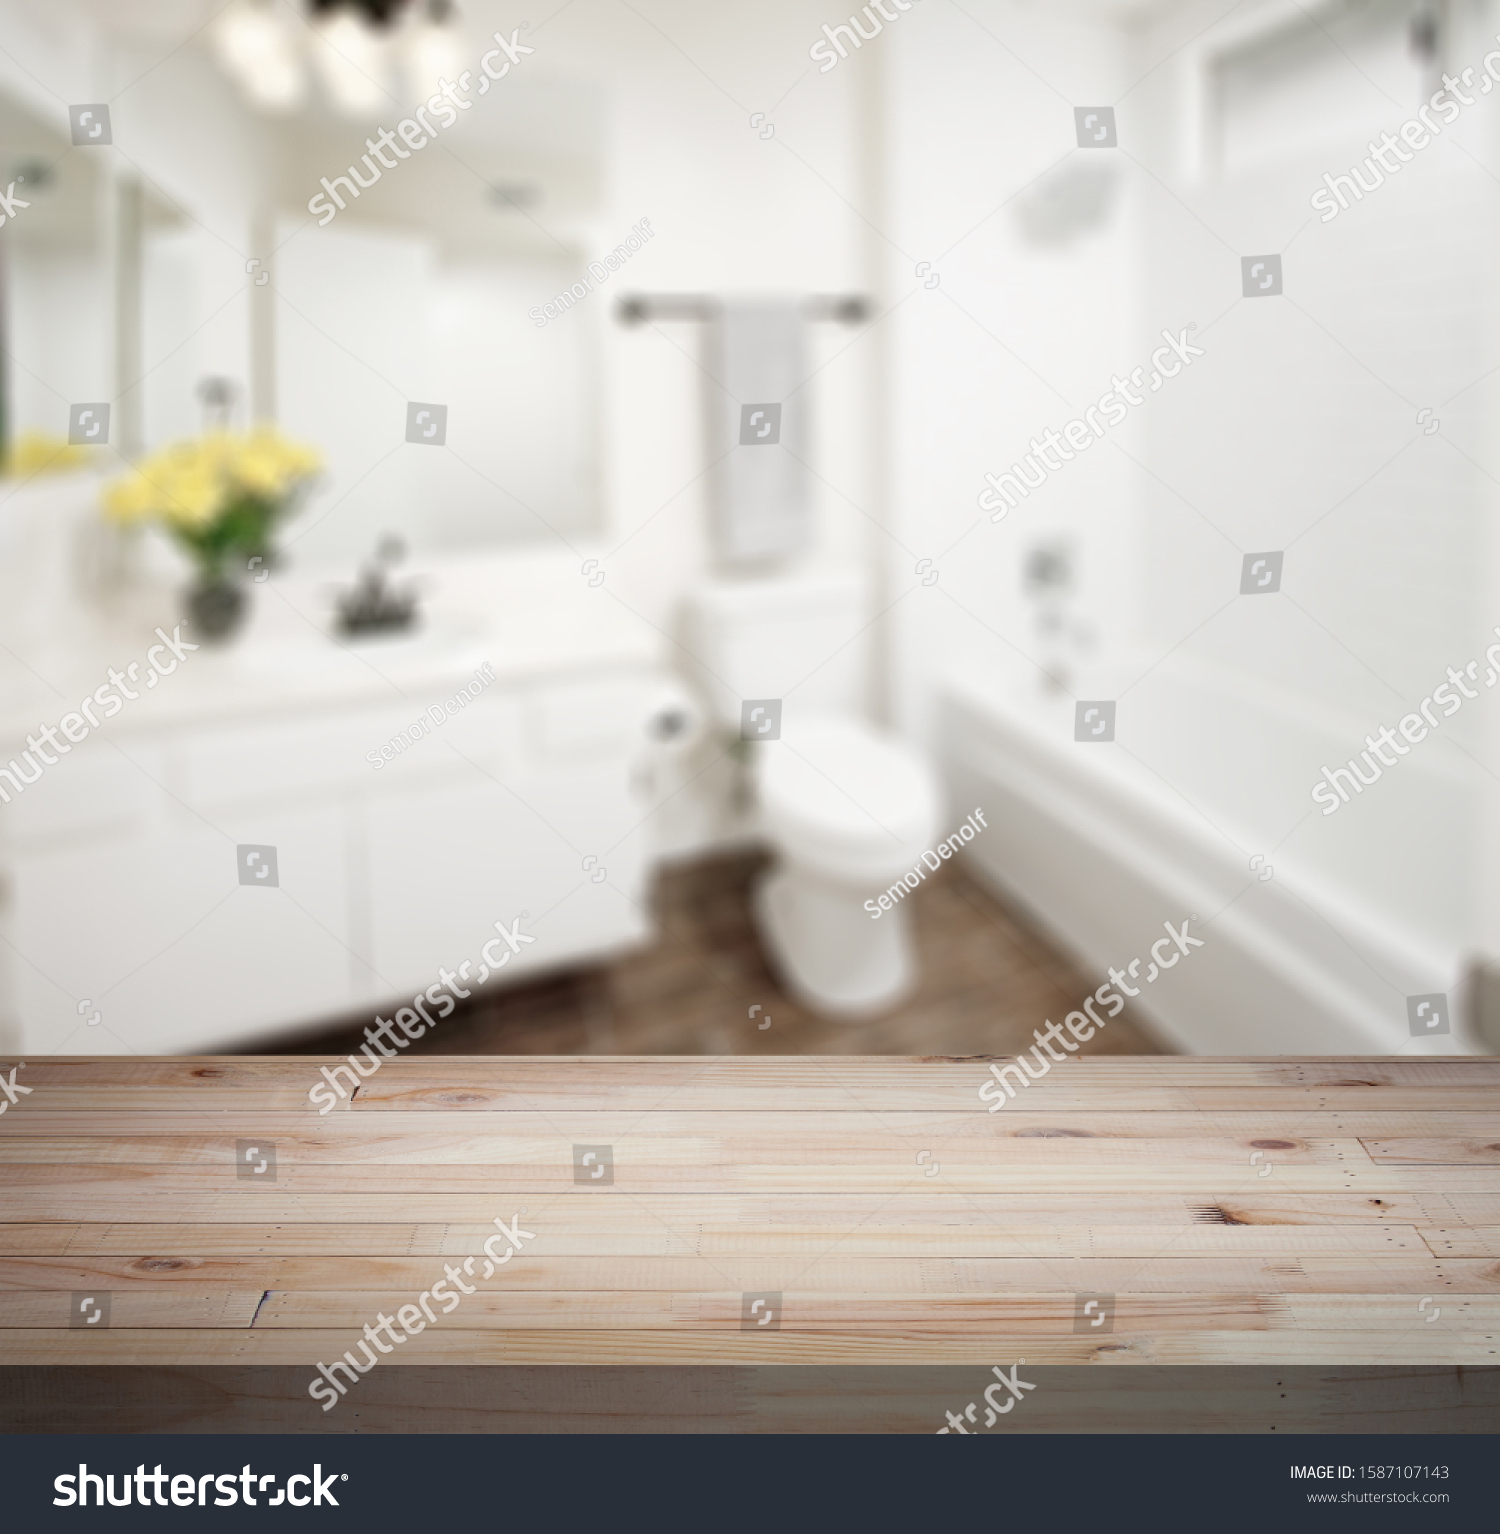 Table Top And Blur Bathroom Of The Background #1587107143